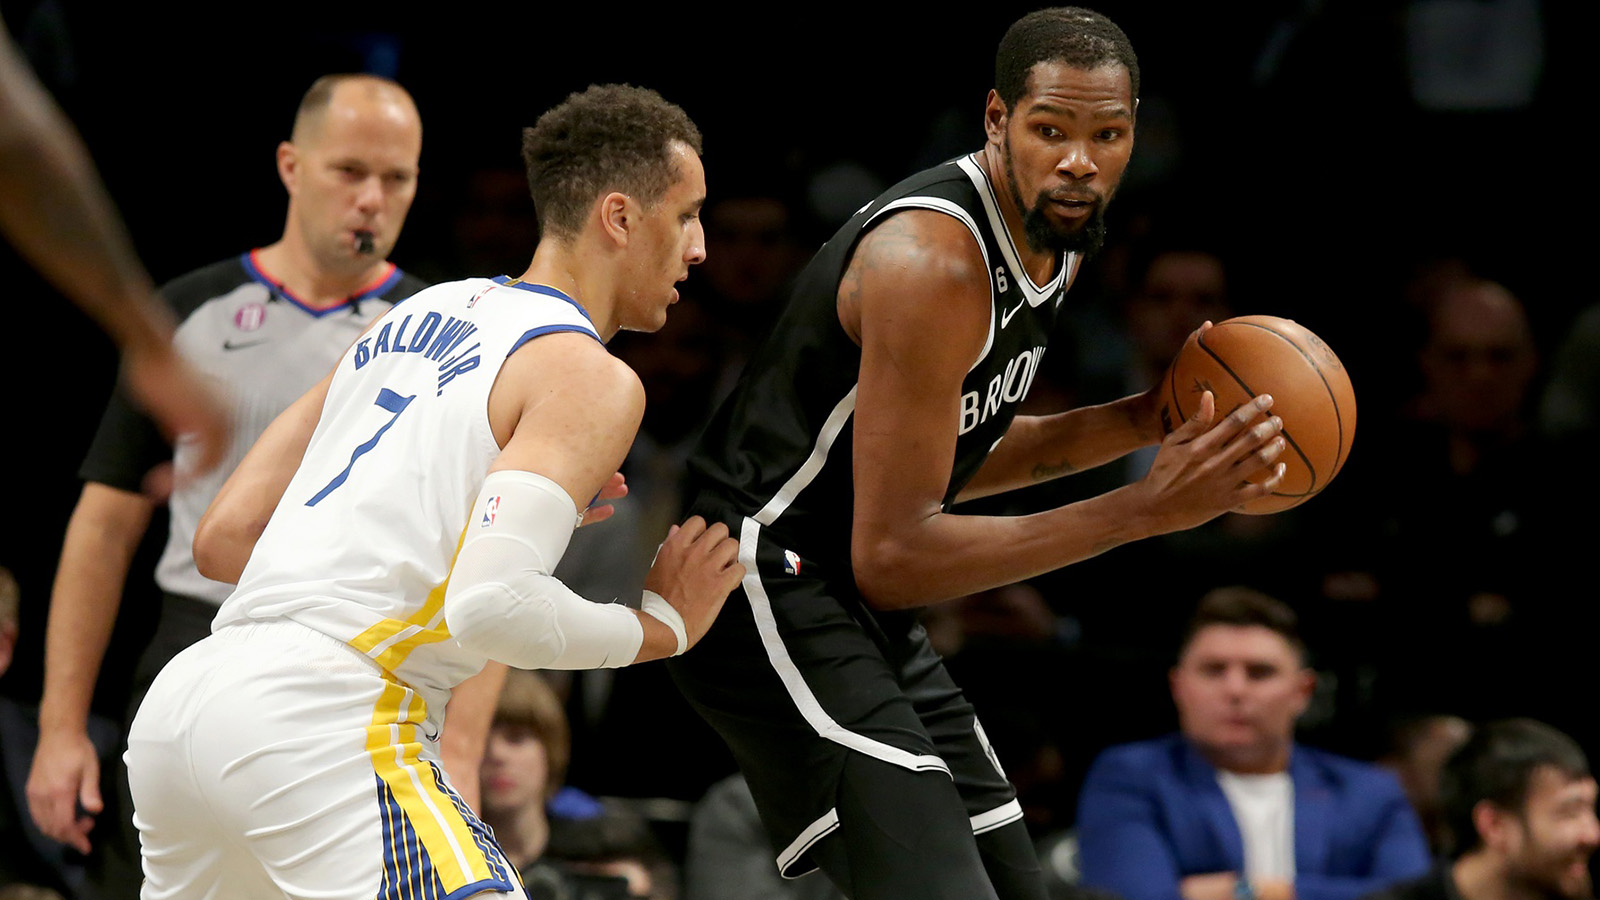 Watch: Warriors welcome back Kevin Durant with tribute video vs. Nets